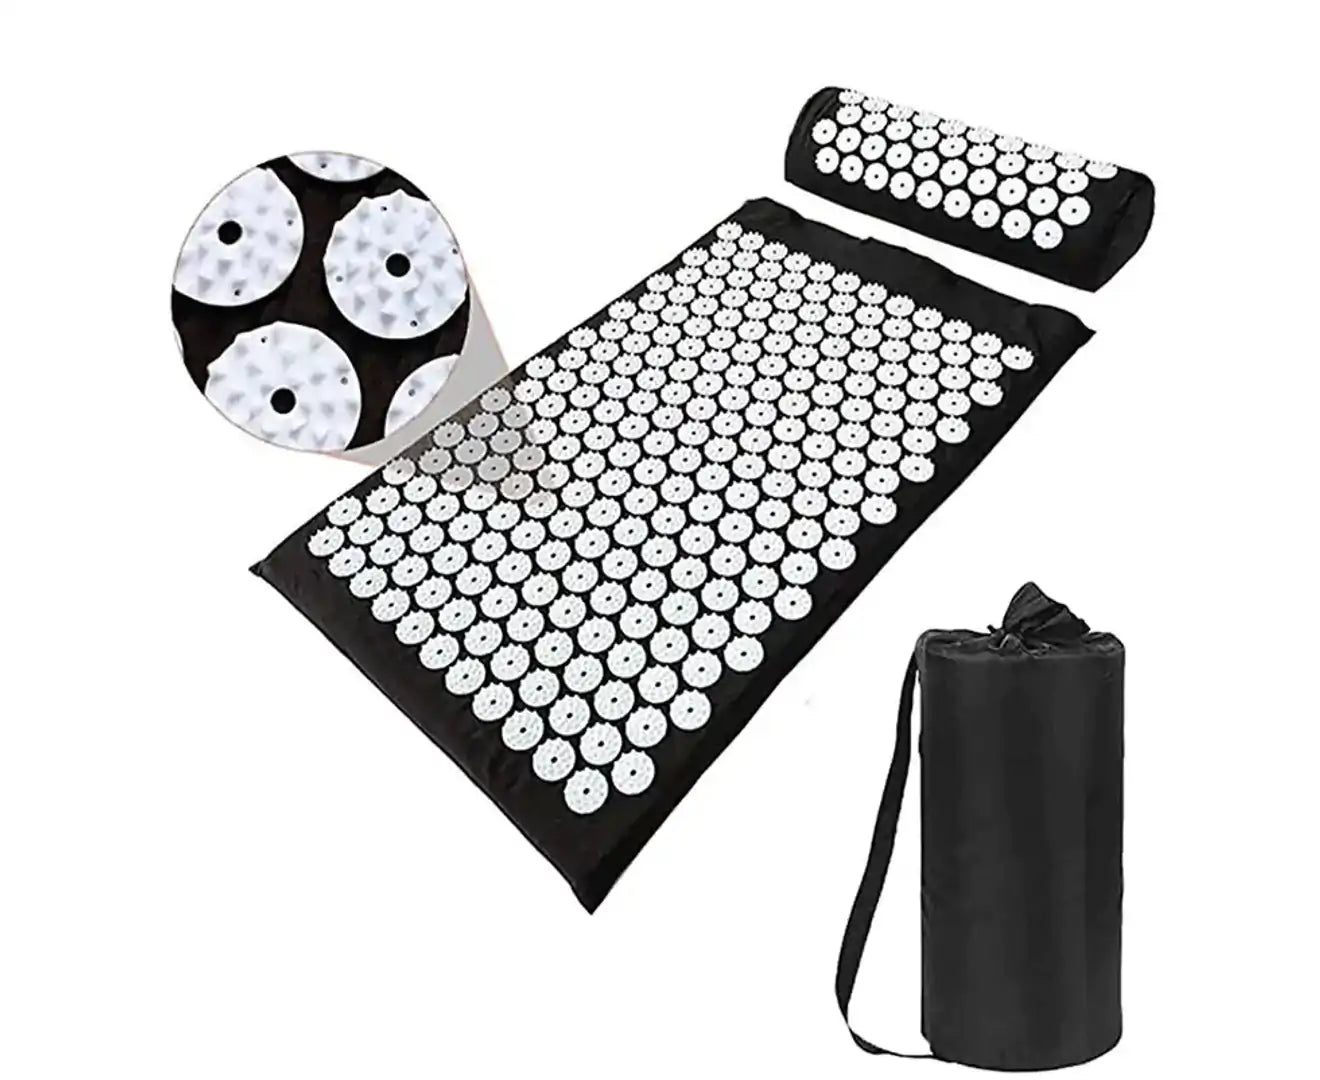 Acupressure Mat + Pillow + Bag Set Deluxe Combo Back and Neck Pain Relief, Black/White